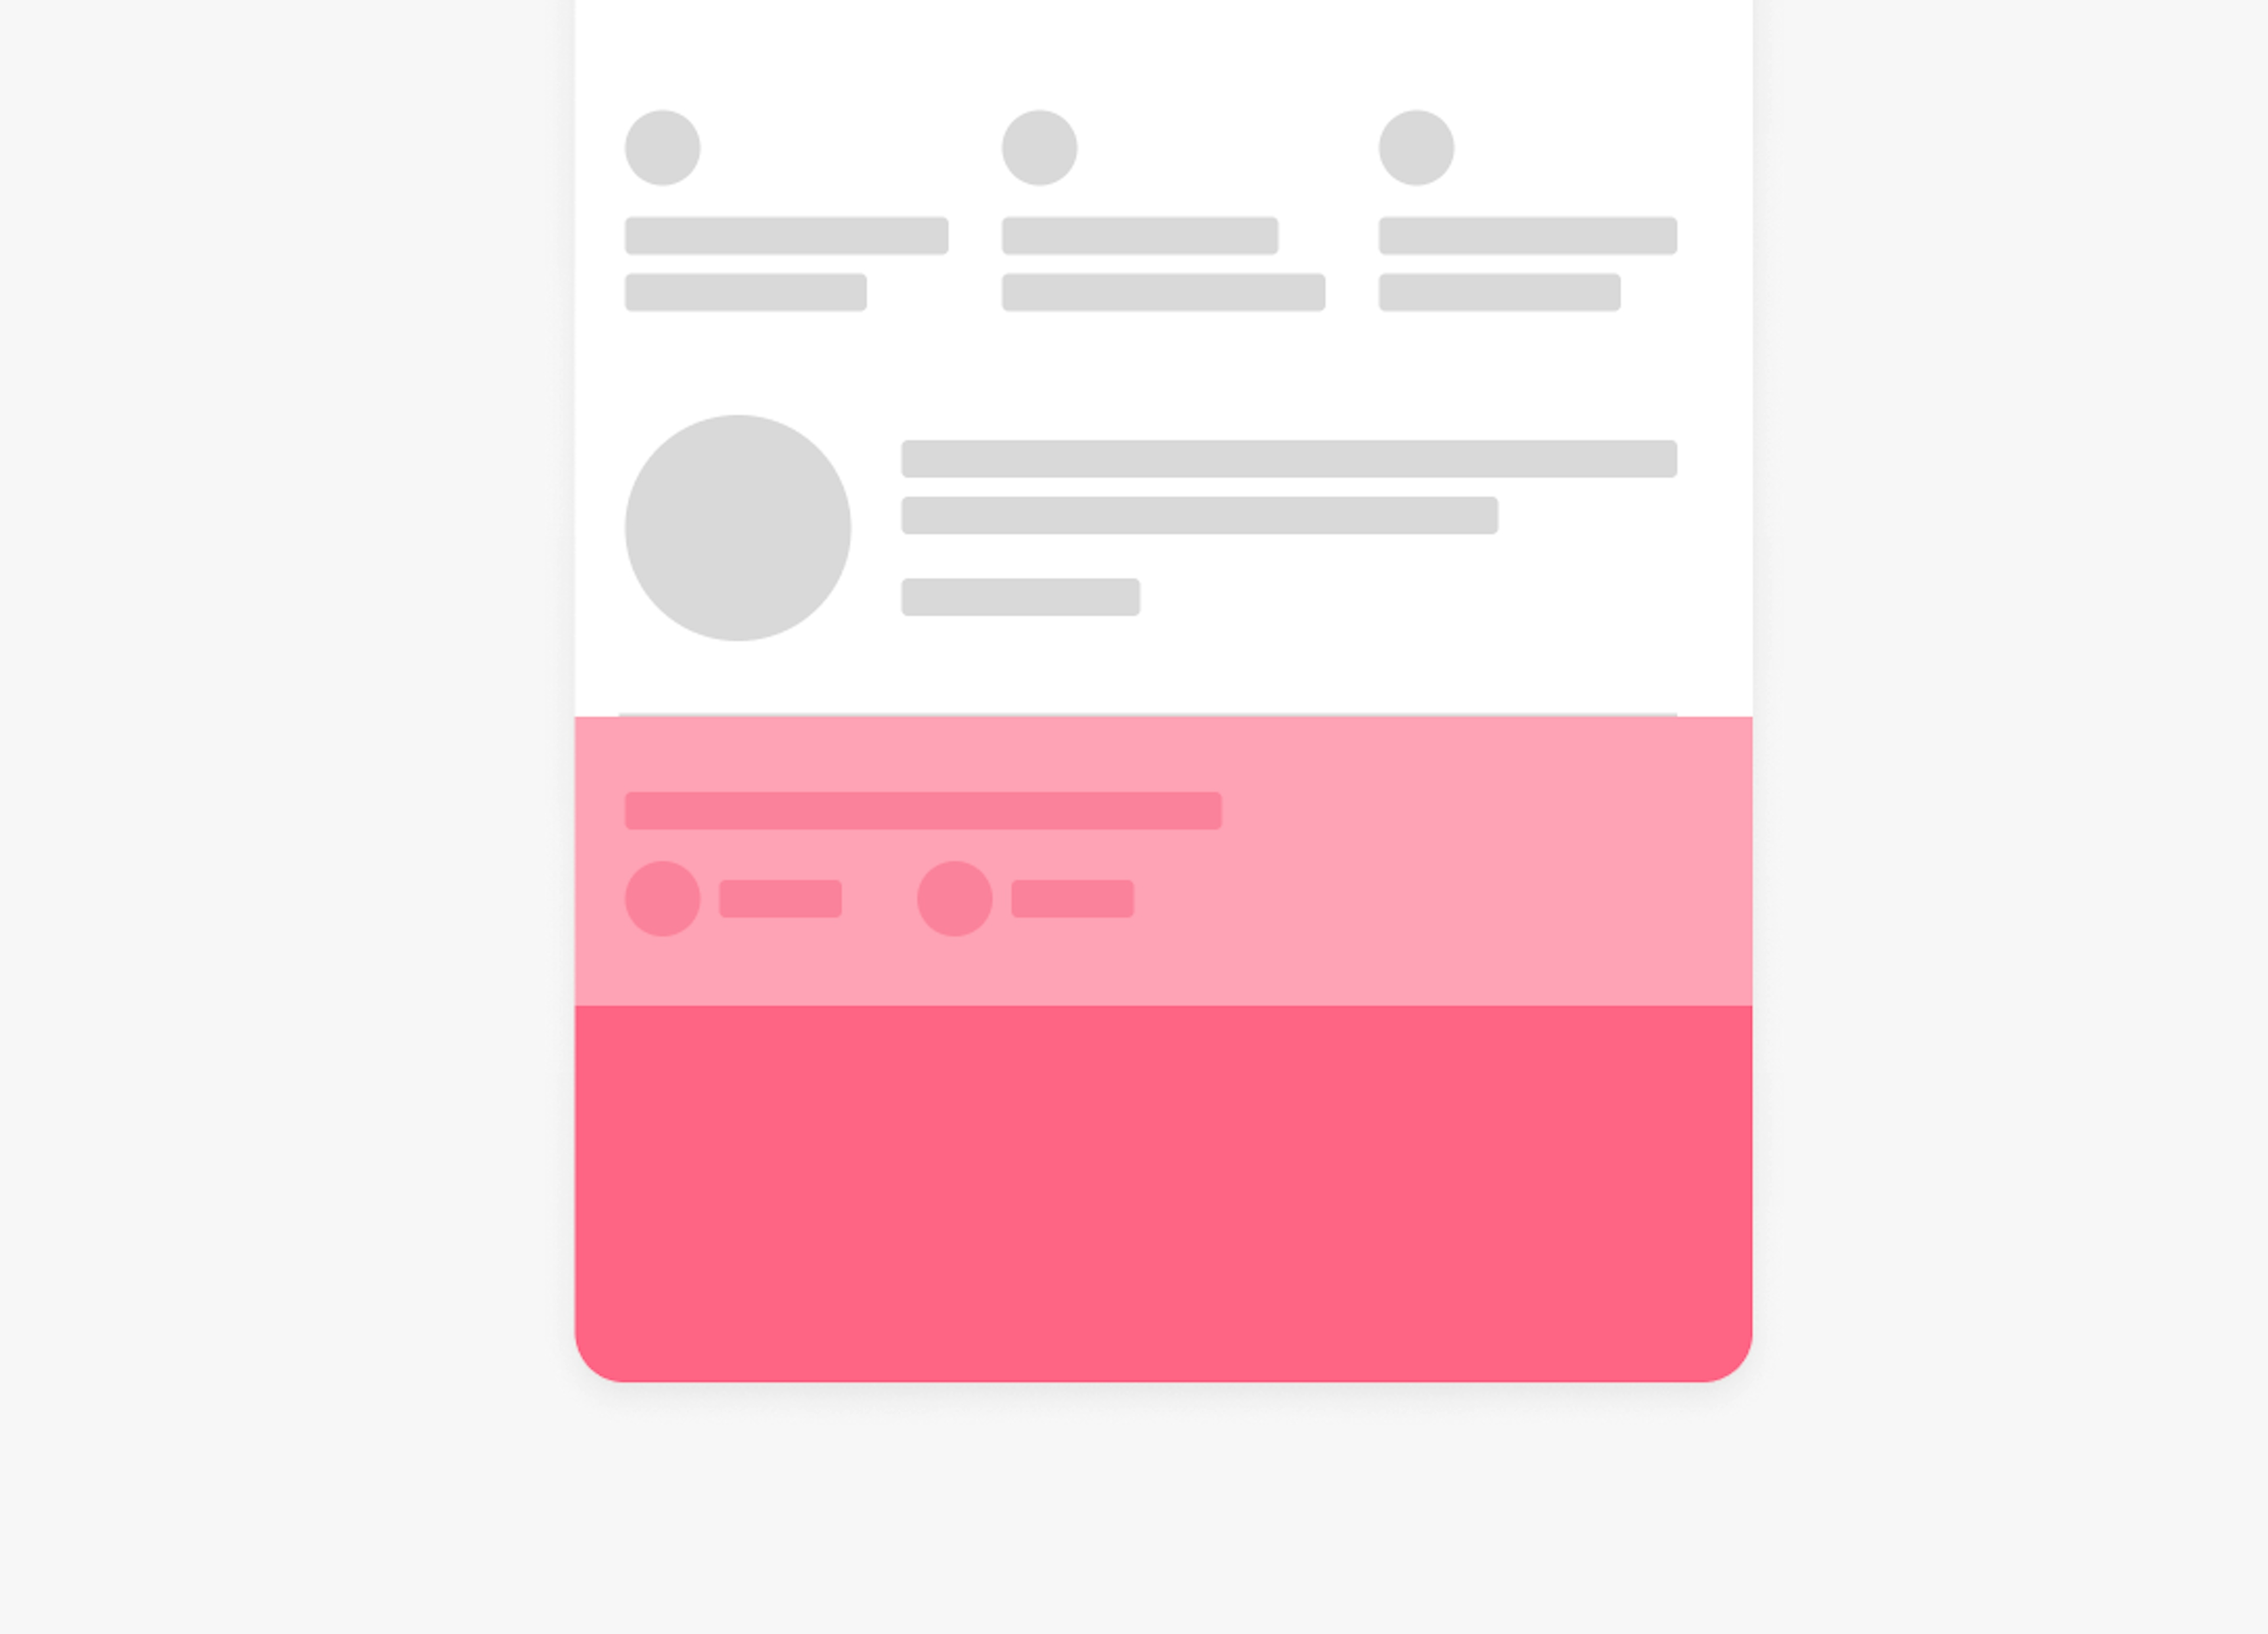 Zoomed in wireframe of the bottom portion of the email which has a survey module and then the email footer.